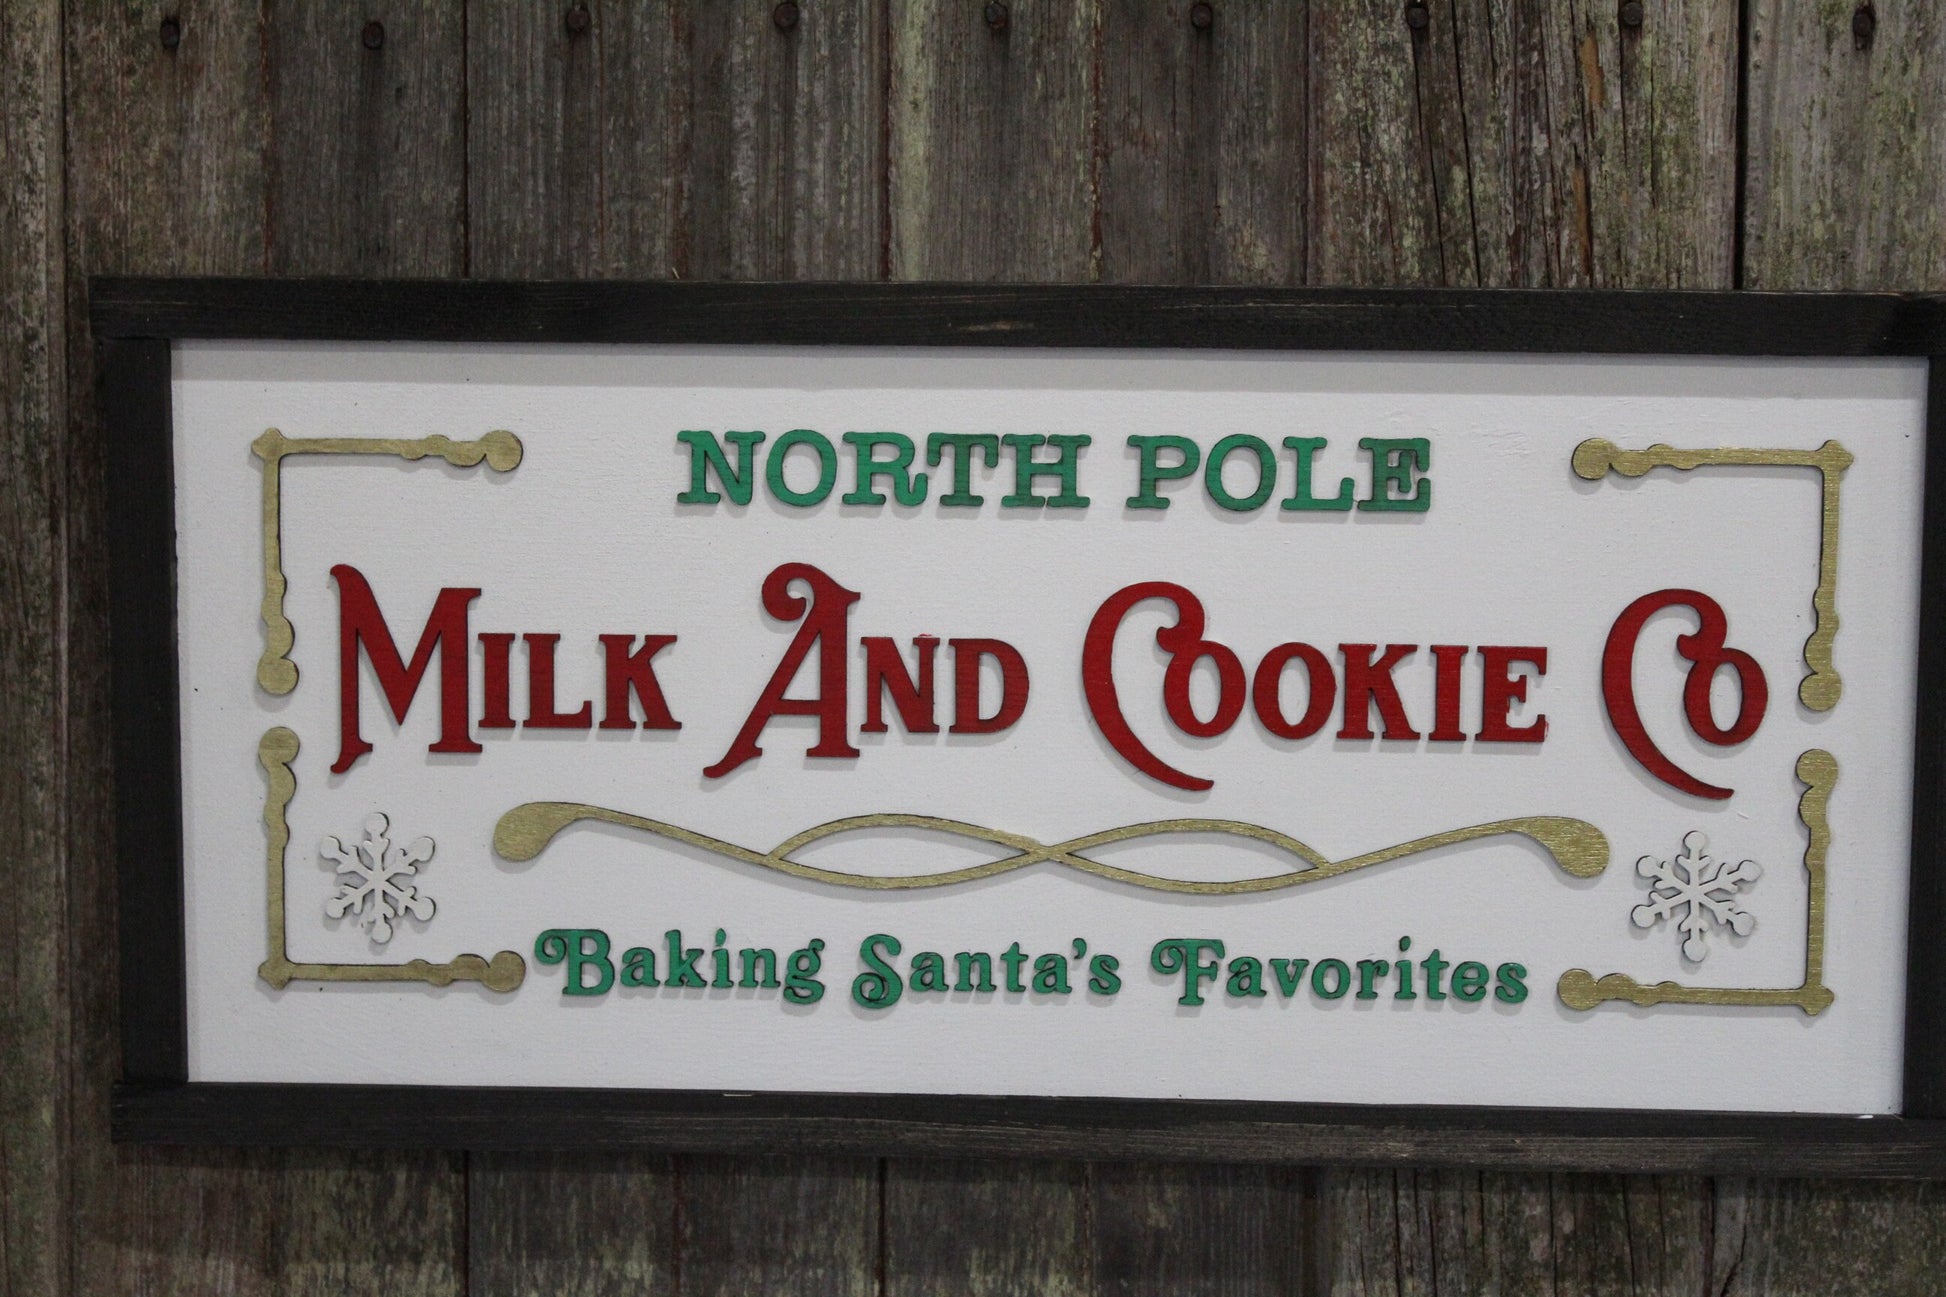 Milk and Cookie Company Wood Sign North Pole Baking Santas Favorite Cookies 3D Raised Text Christmas Decoration Wall Advertising